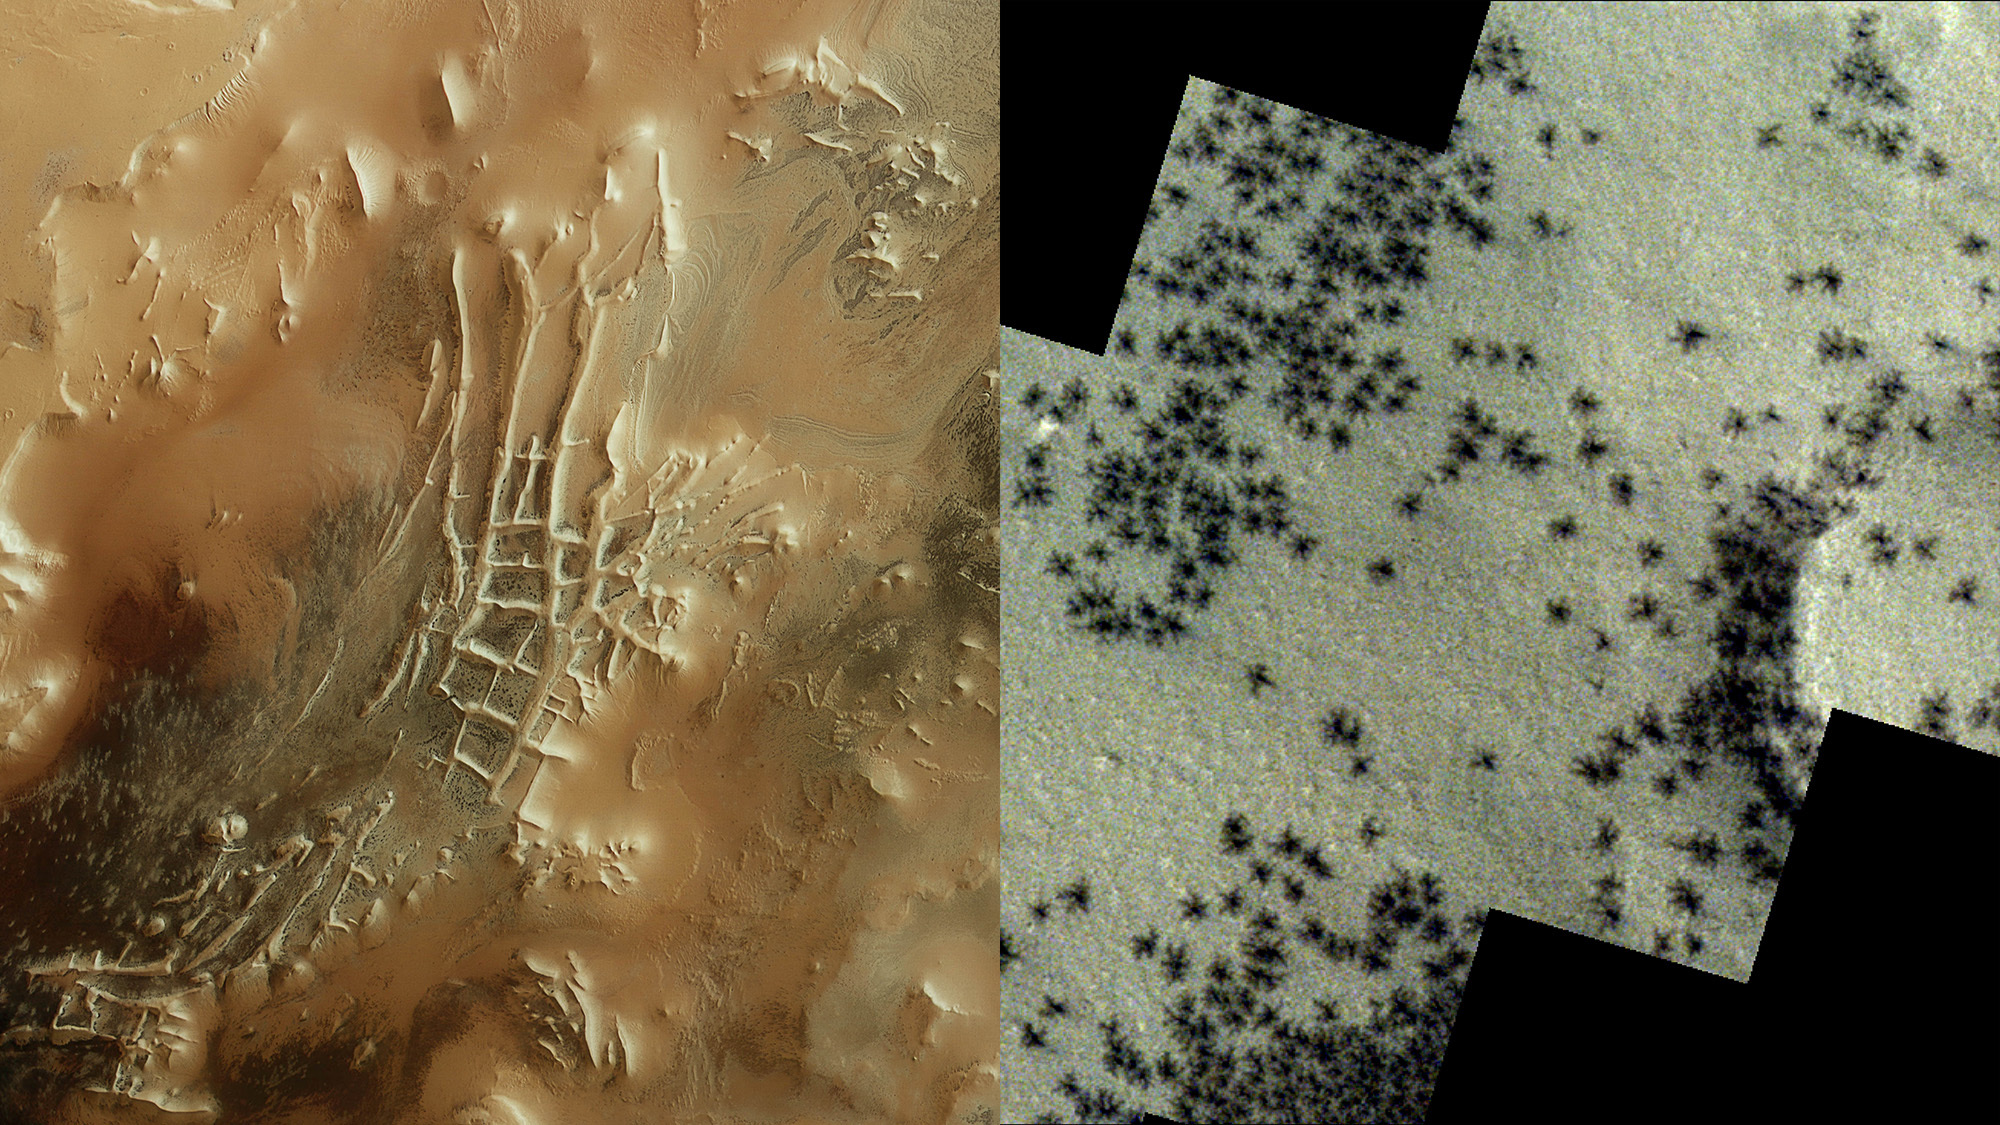 left image- This rectangular image shows part of the martian surface as if the viewer is looking down and across the landscape, with the irregular, mottled ground appearing in swirled tones of brown and tan. right image- A slice of the martian surface is shown here. A rounded segment of an eroded crater basin is visible to the right. The key features seen across the image are dark spots with tendrils that are eerily reminiscent of spiders. These are visible in large numbers to the left, and scattered irregularly across the rest of the image.